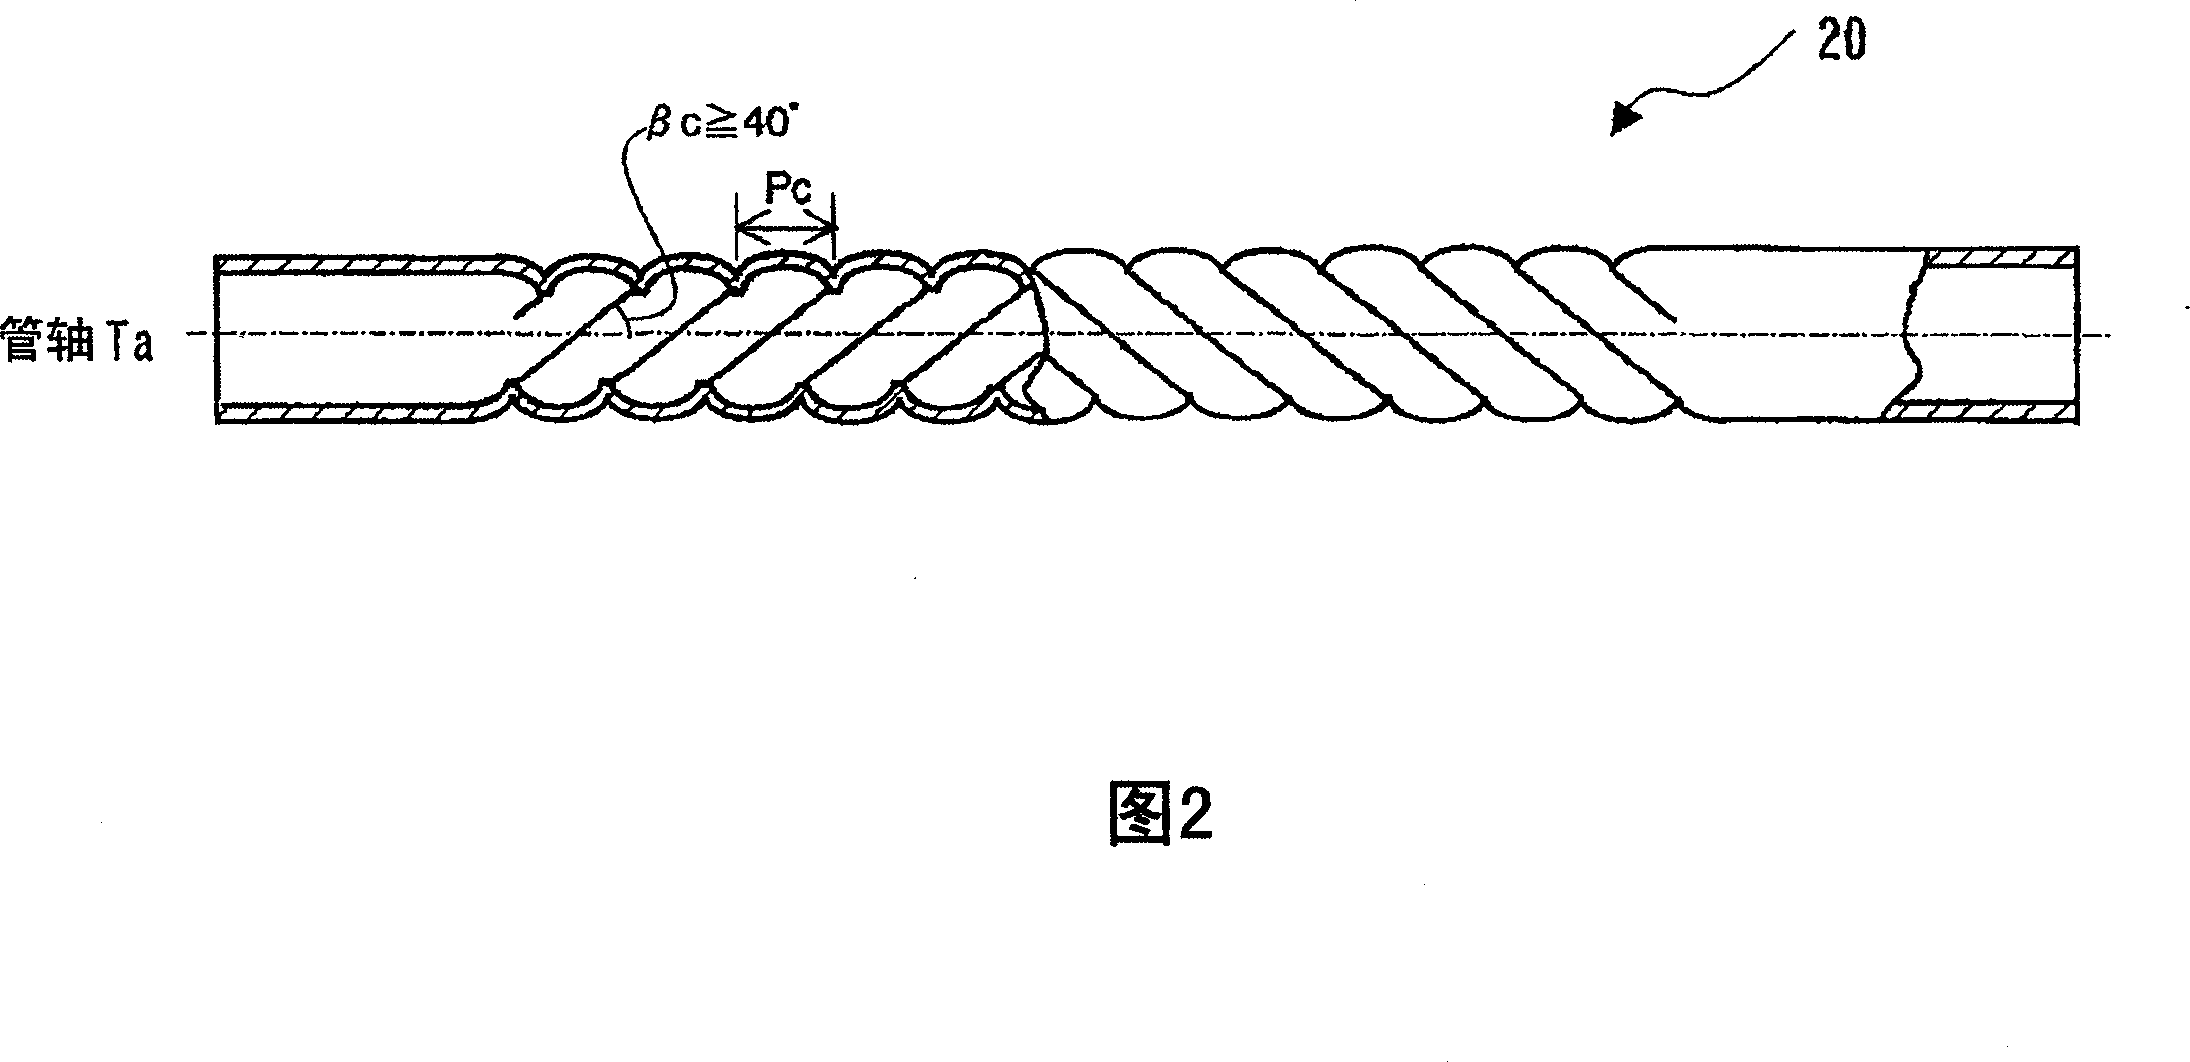 Heat transfer tube and heat exchanger using same